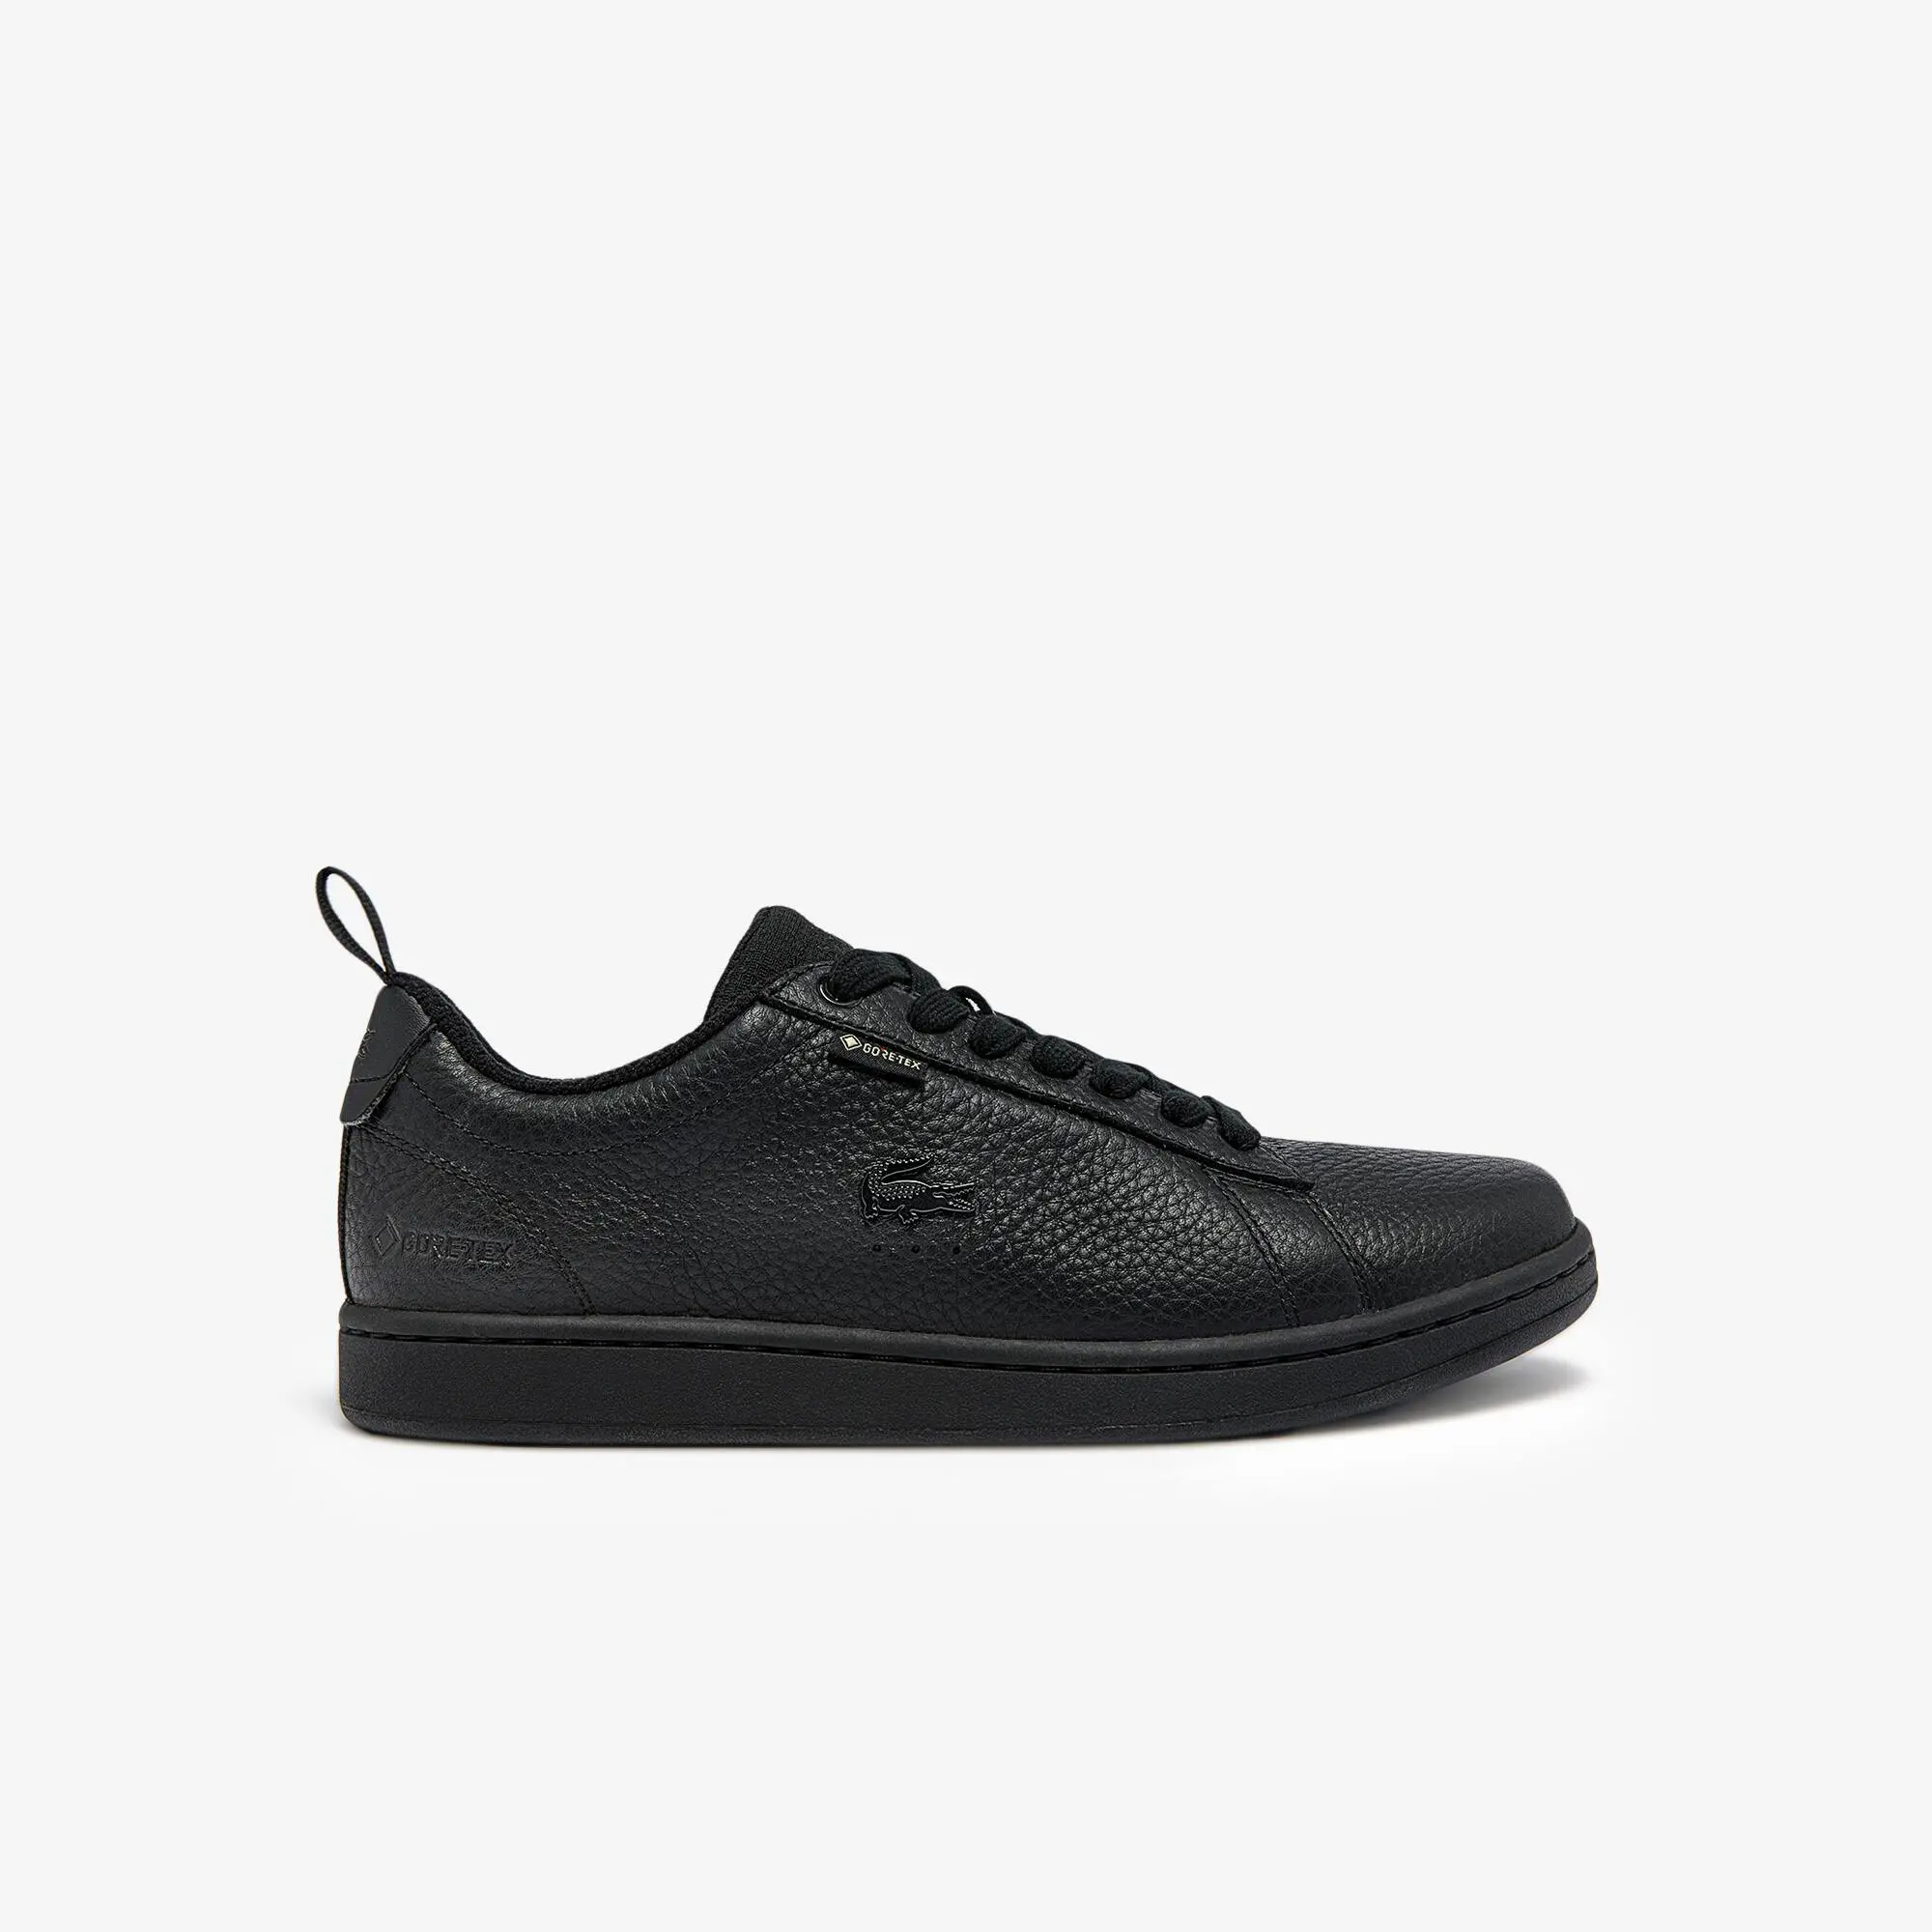 Lacoste Men's Carnaby GTX Leather Trainers. 1